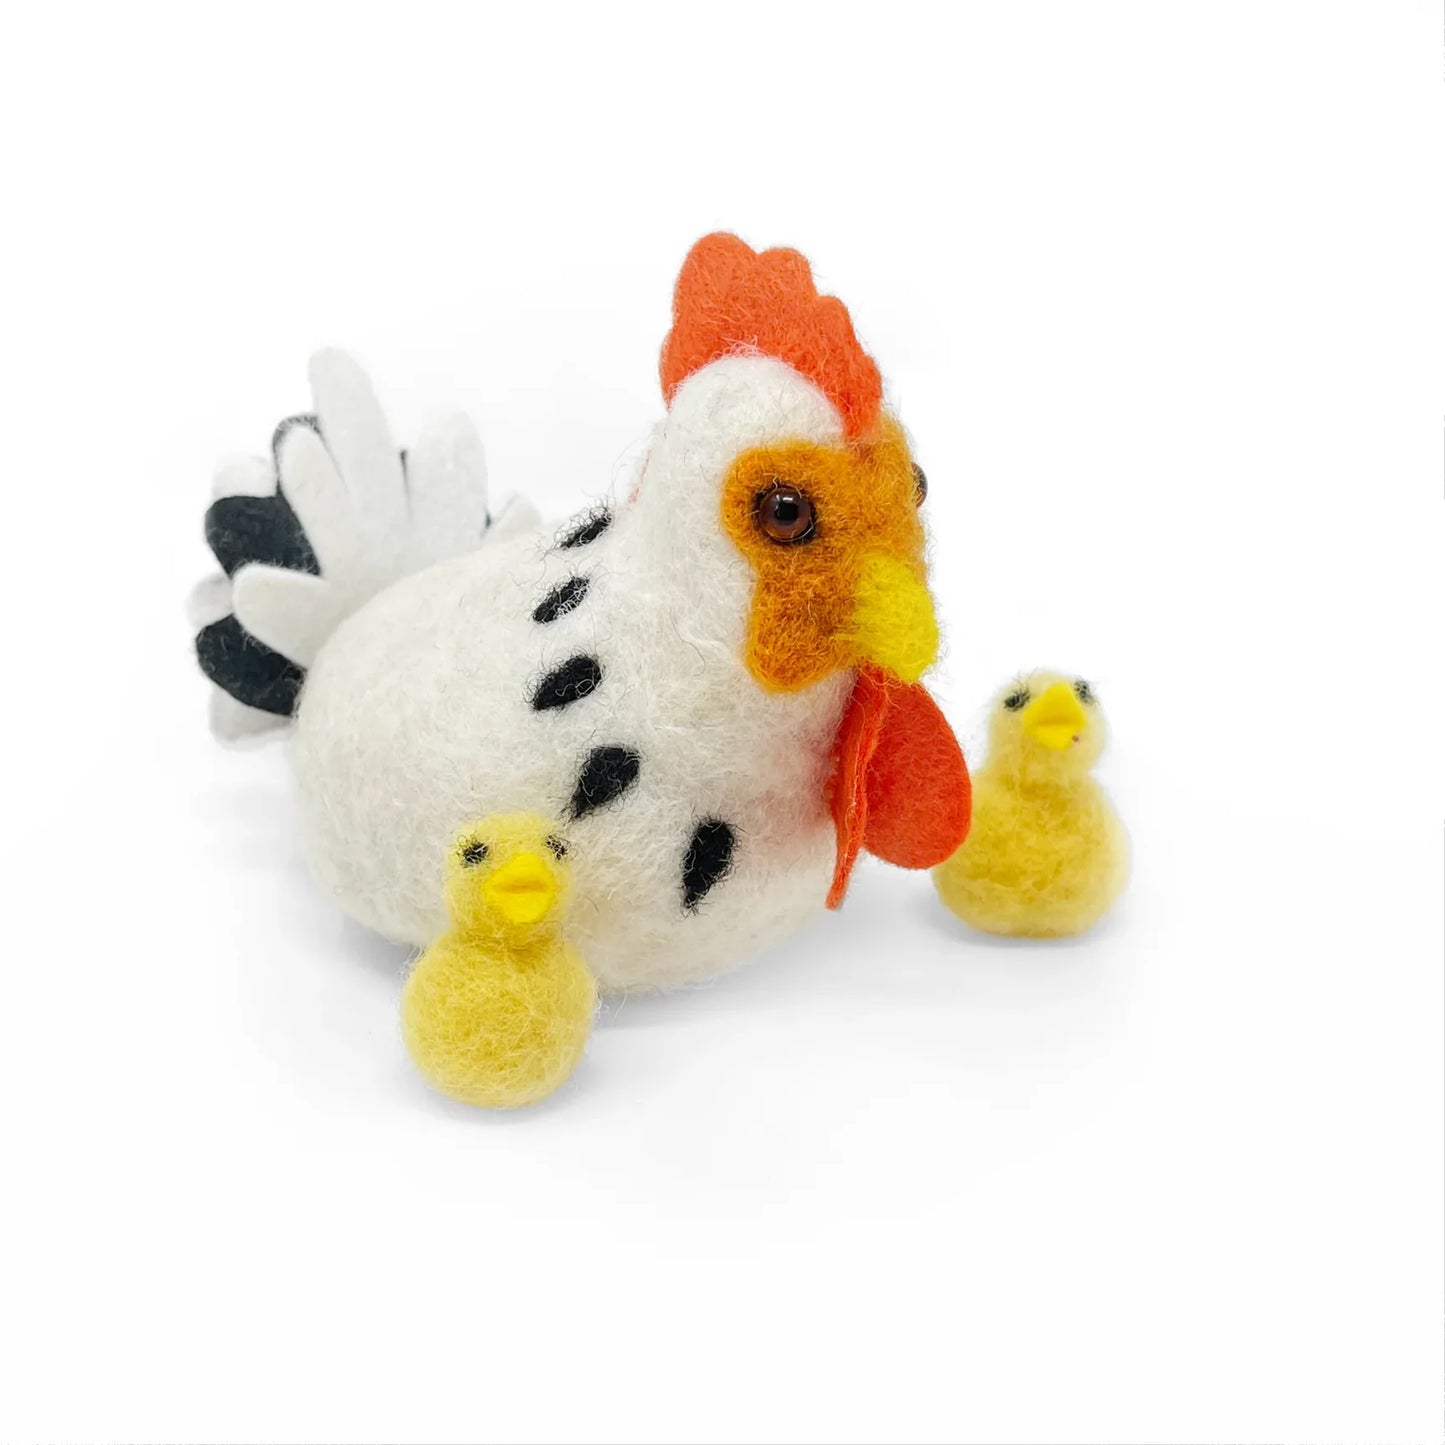 Hen and Chickens Needle Felting Kit